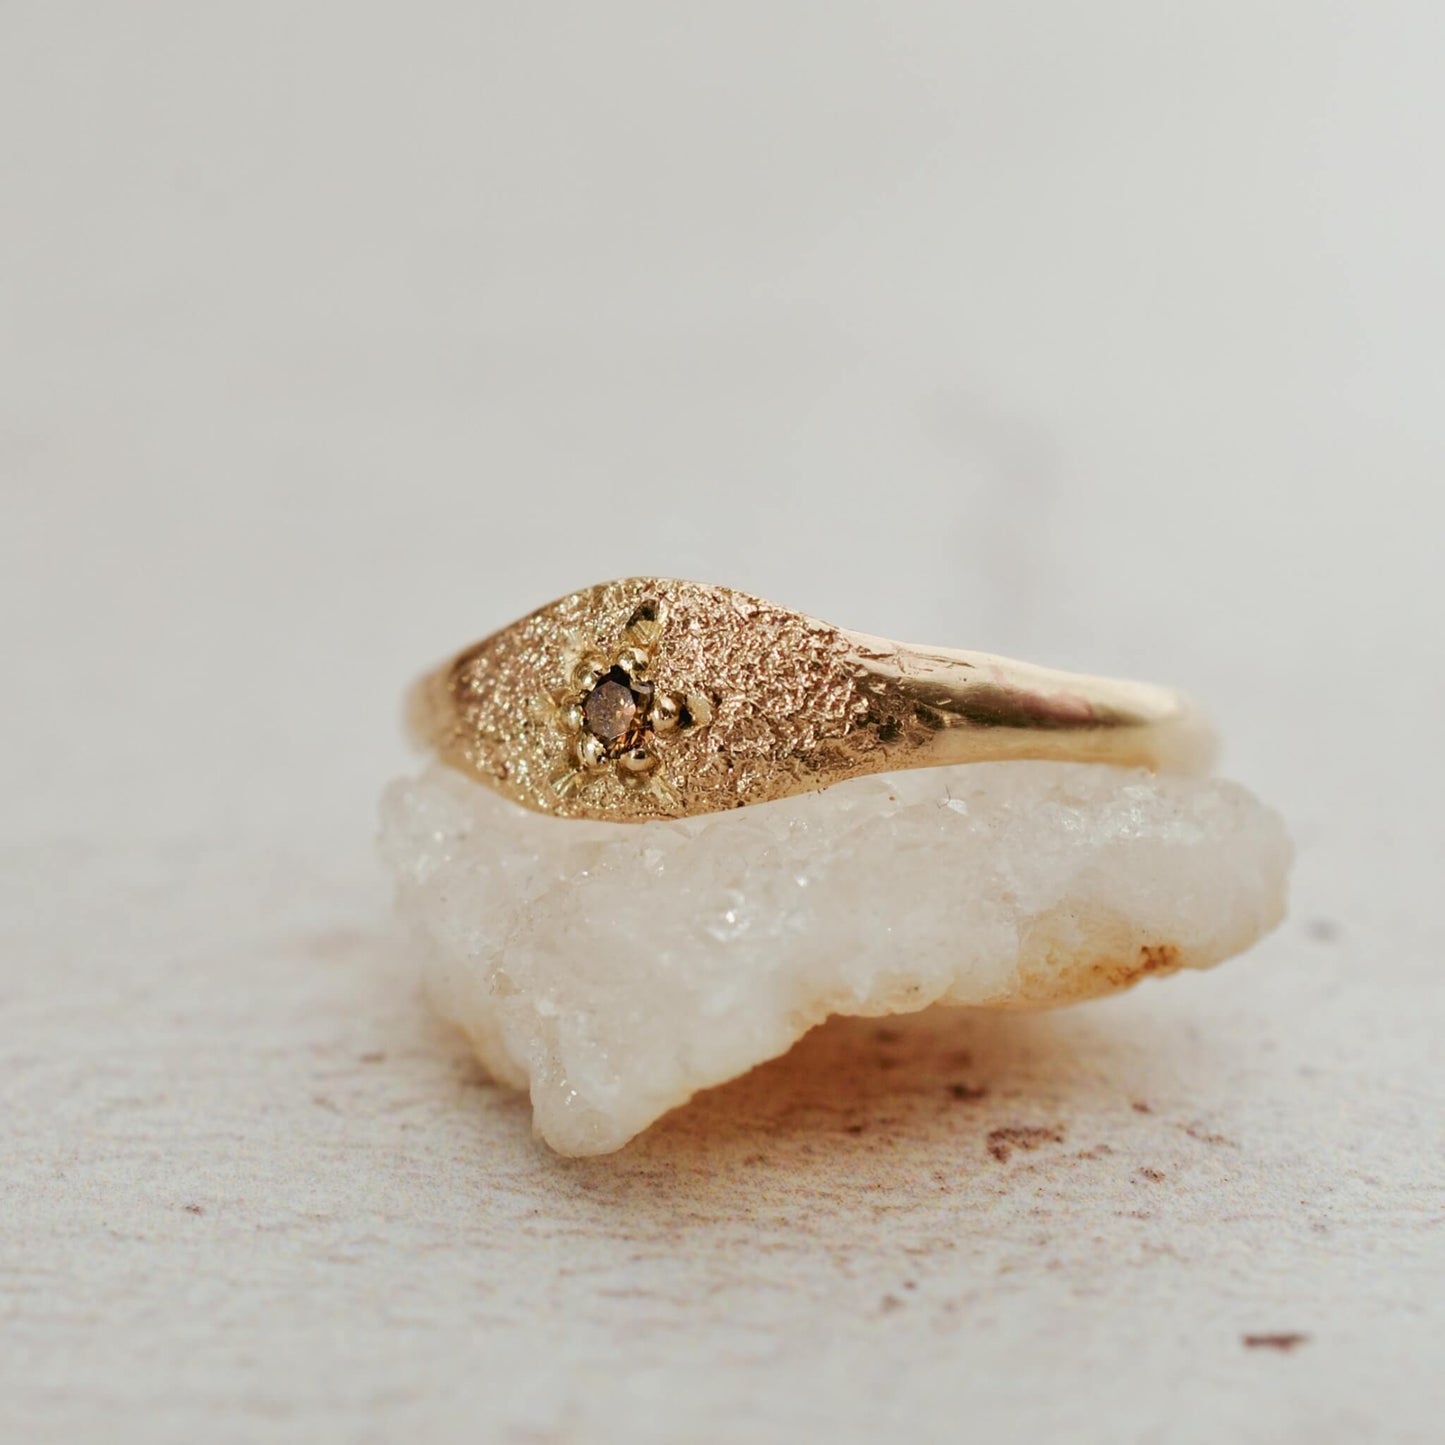 Raw Textured Ring with Cognac Diamond, Gold